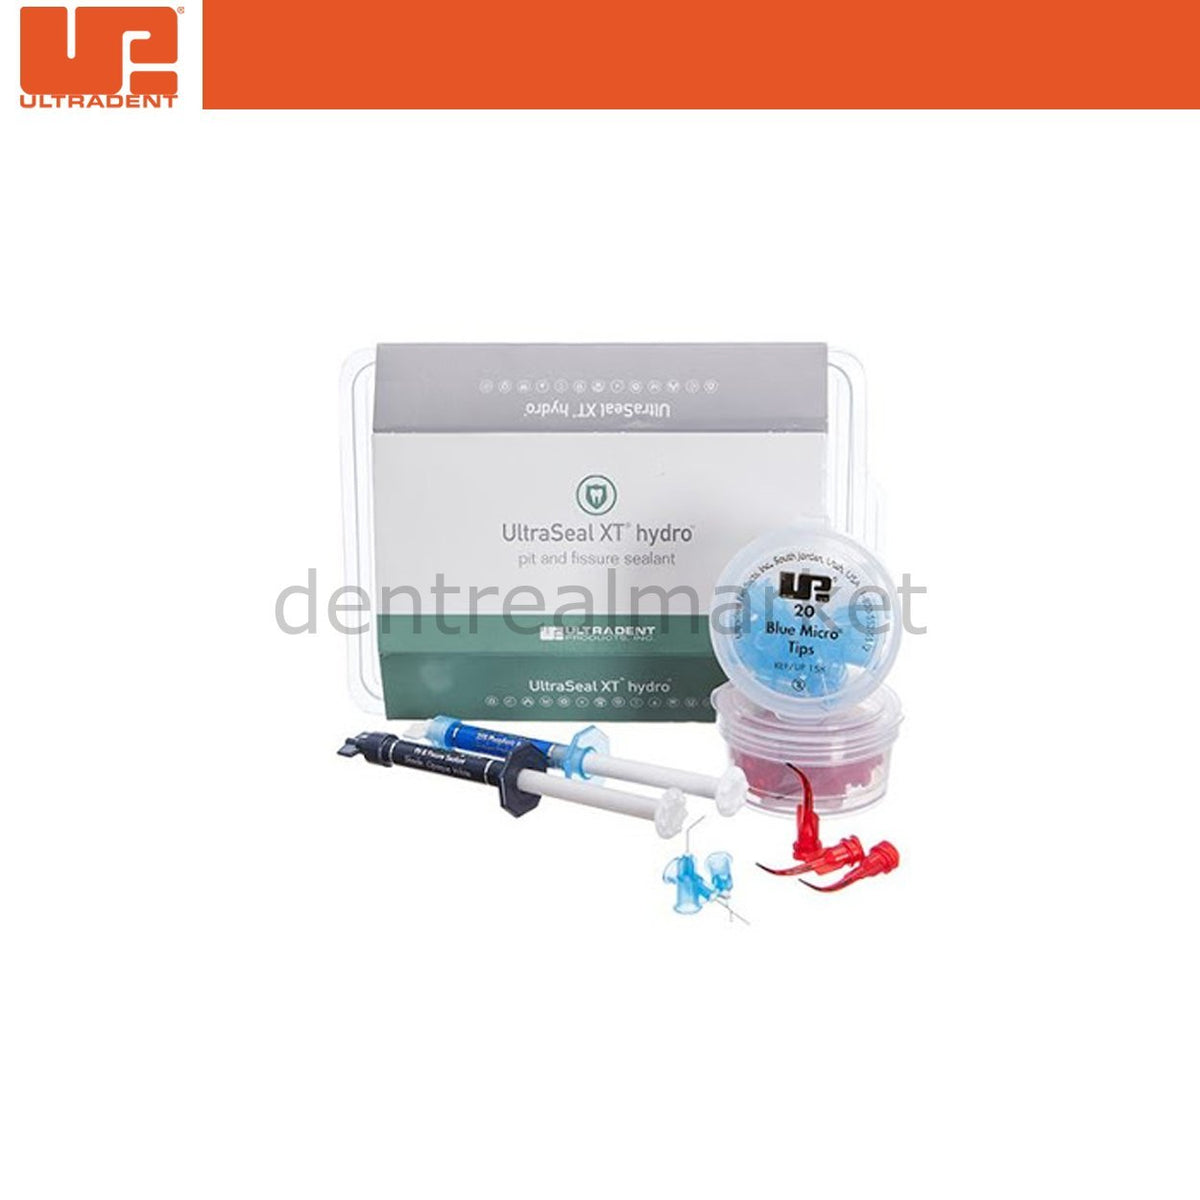 DentrealStore - Ultradent UltraSeal XT Hydro Hydrophilic Pit and Fissure Sealant